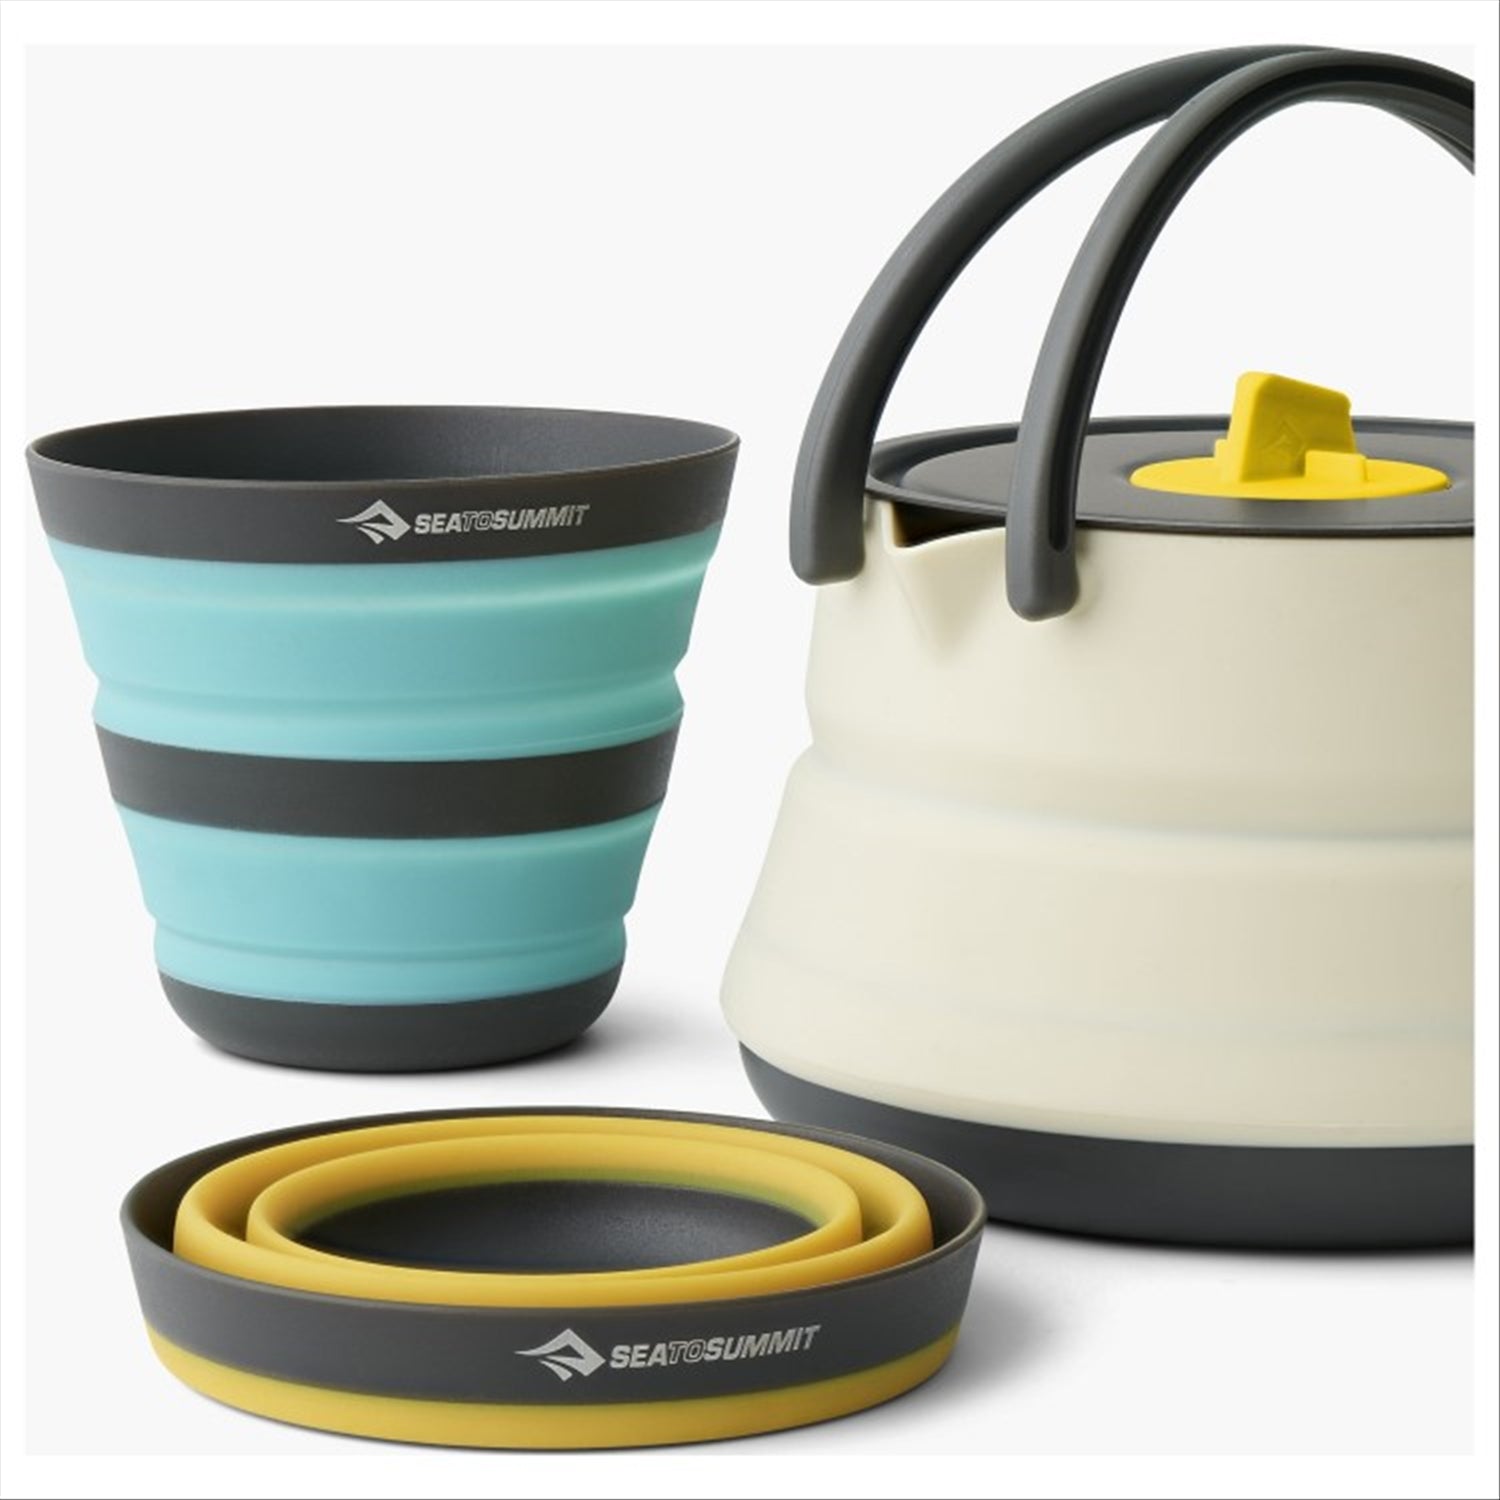 Sea to Summit Sea To Summit Frontier Collapsible Kettle Cook Set - 2P - 3 Piece